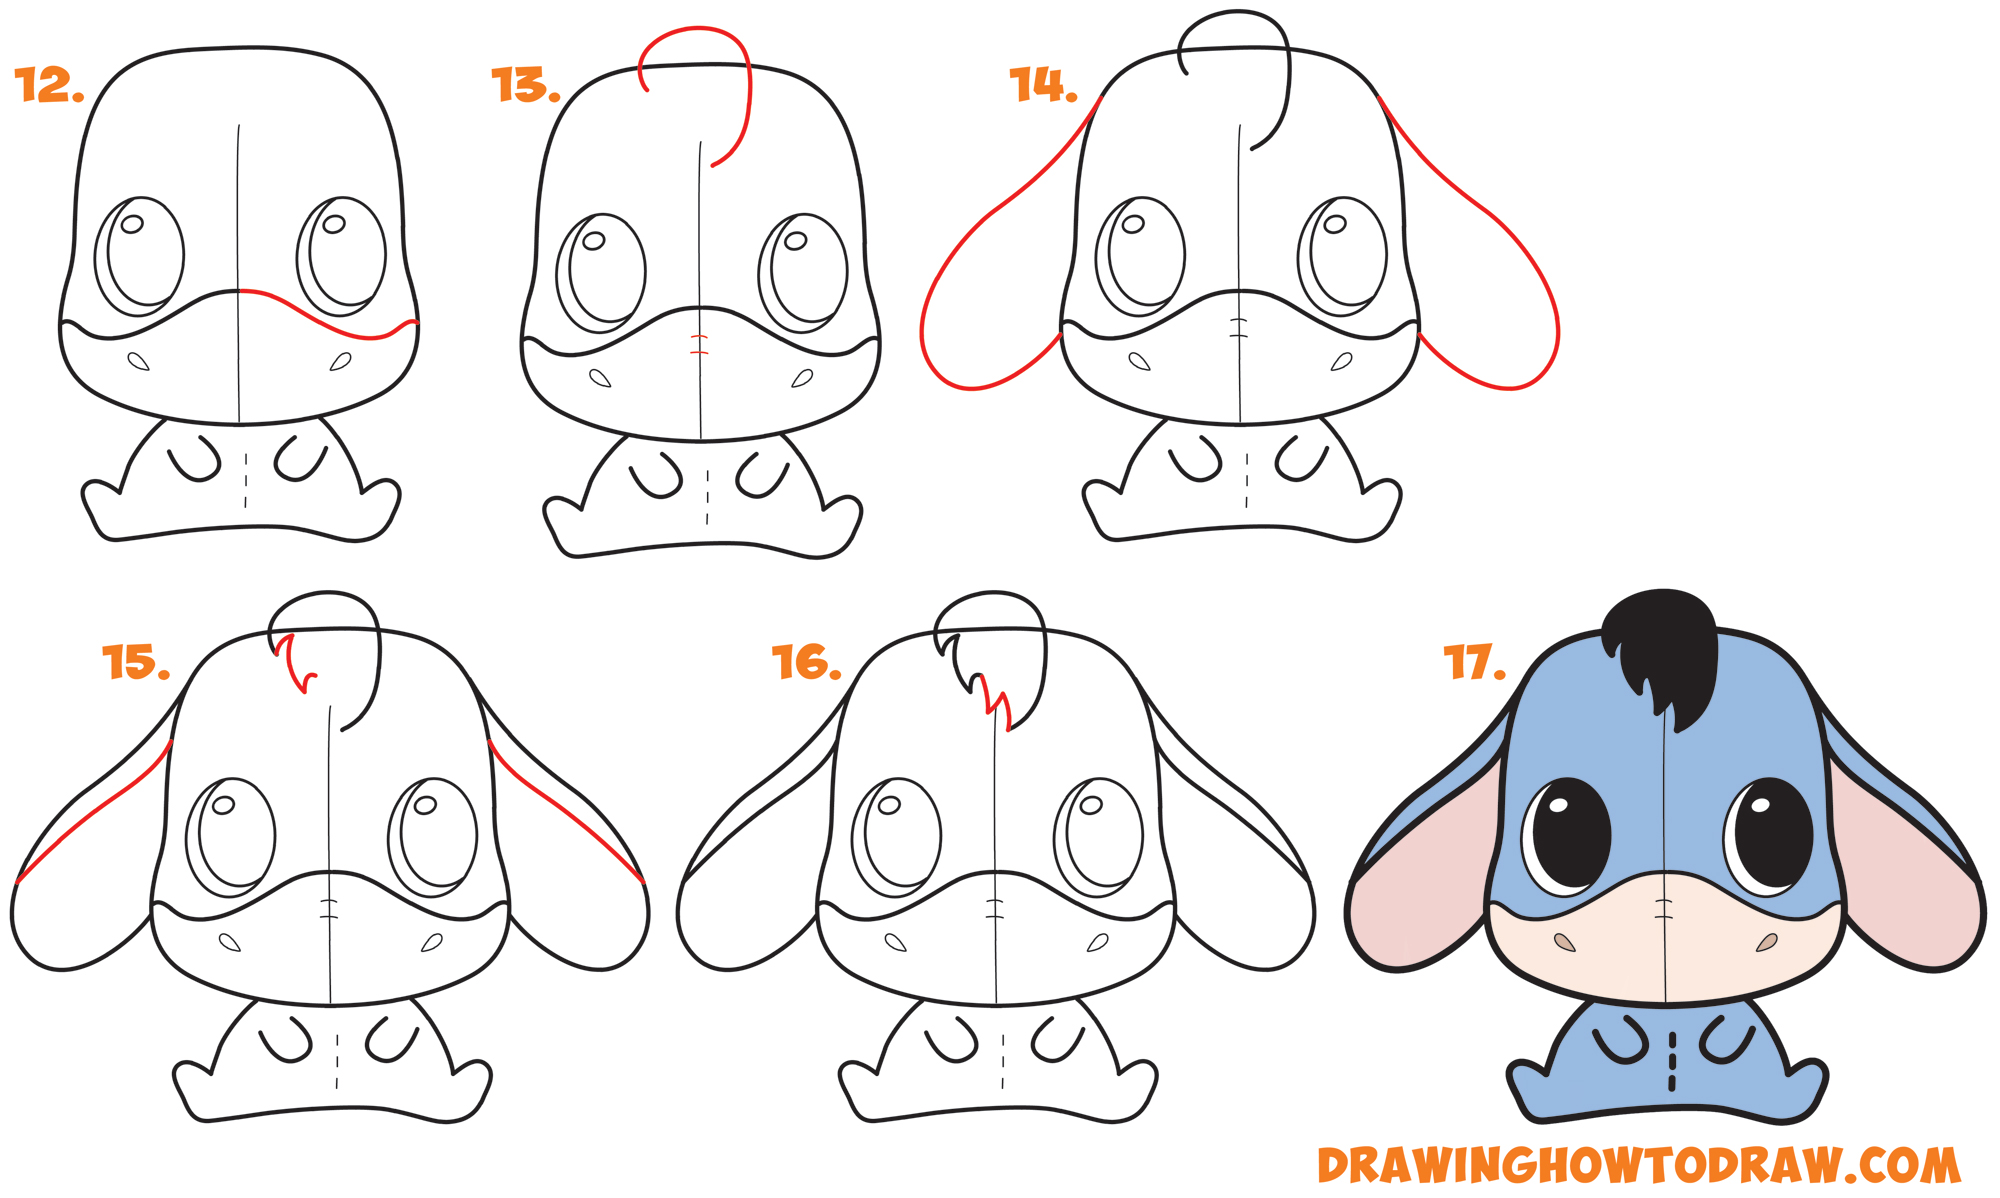 Best How To Draw Chibi Characters For Beginners of all time Learn more here 